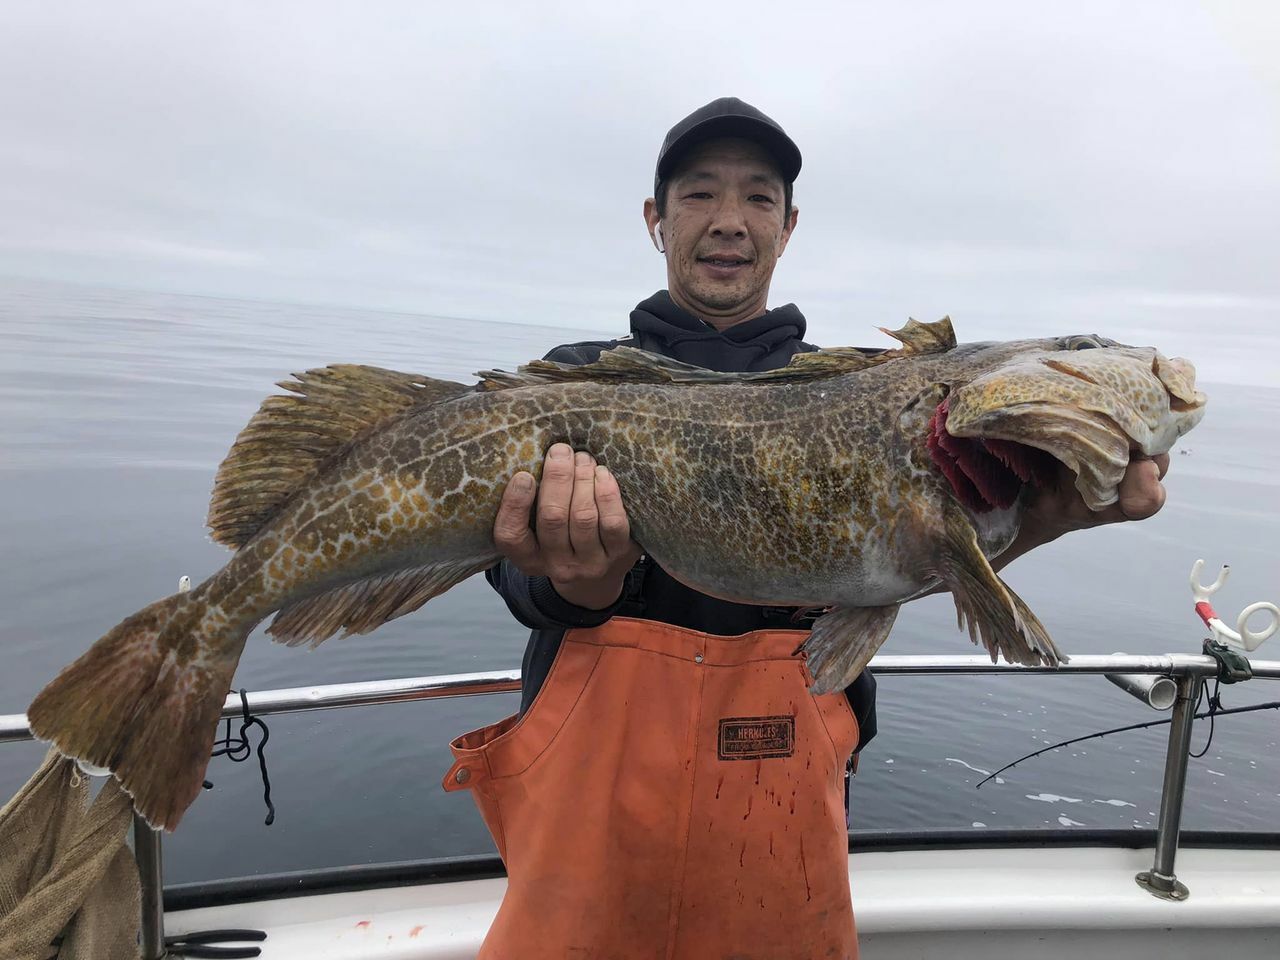 Lingcod Limits up to 25 pounds